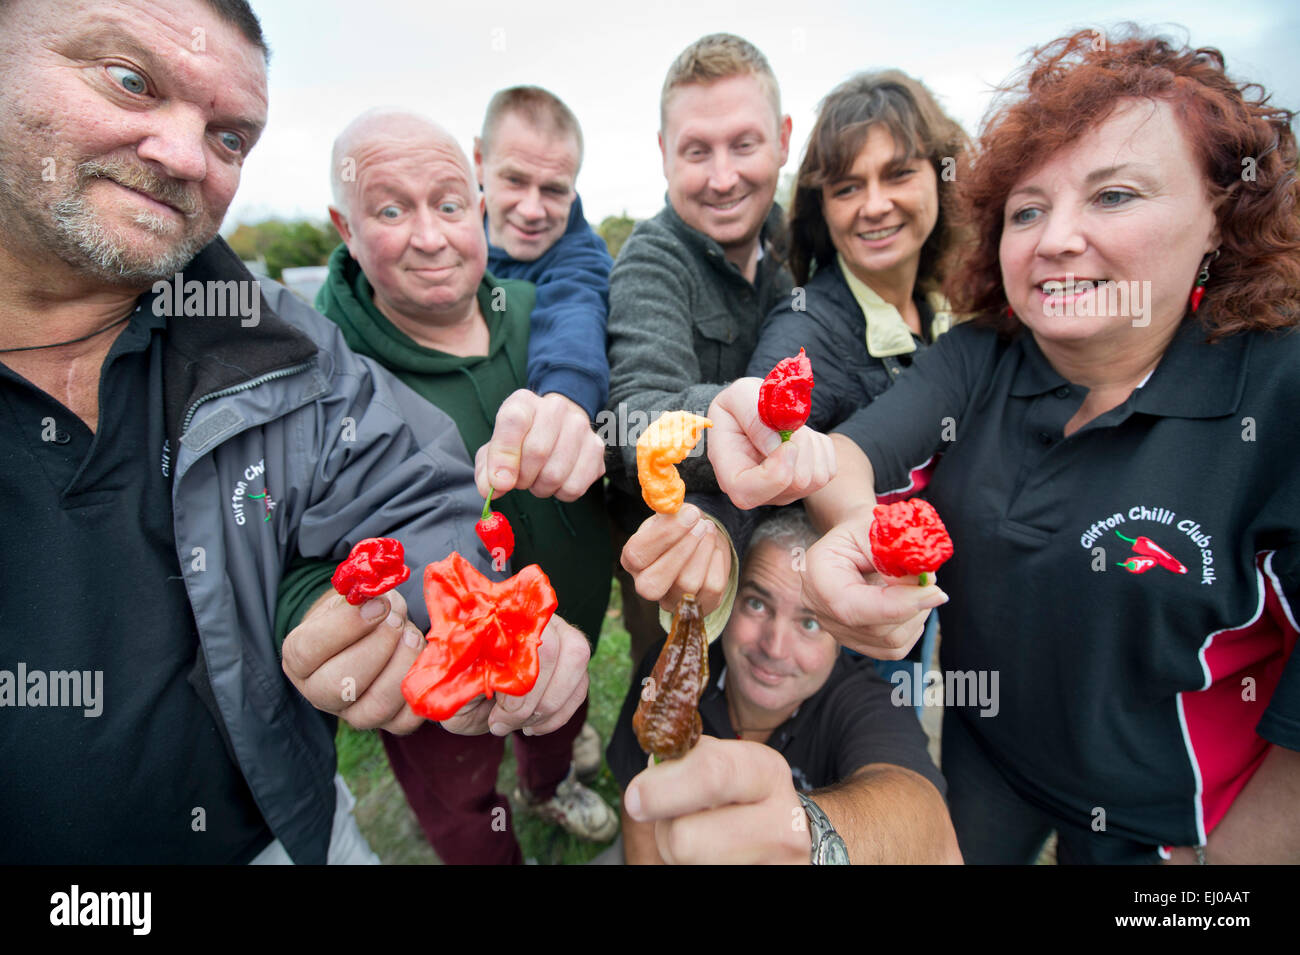 Members of the Clifton Chilli Club from Bristol with some of their produce meeting at the Dovercourt Allotments UK Stock Photo